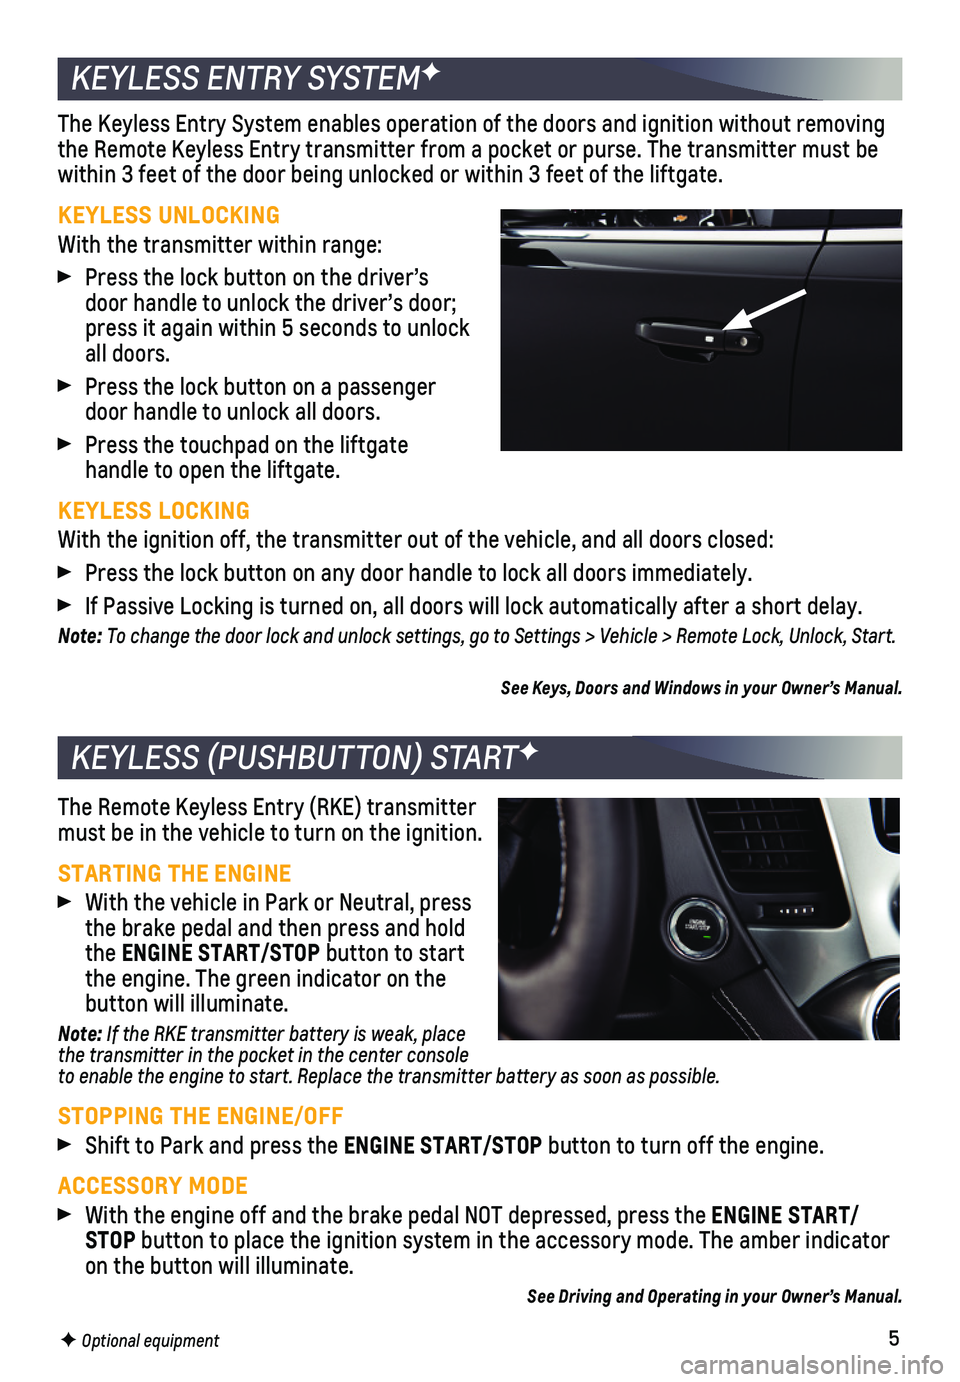 CHEVROLET SUBURBAN 2019  Get To Know Guide 5
The Remote Keyless Entry (RKE) transmitter must be in the vehicle to turn on the ignition.
STARTING THE ENGINE  
 With the vehicle in Park or Neutral, press the brake pedal and then press and hold t